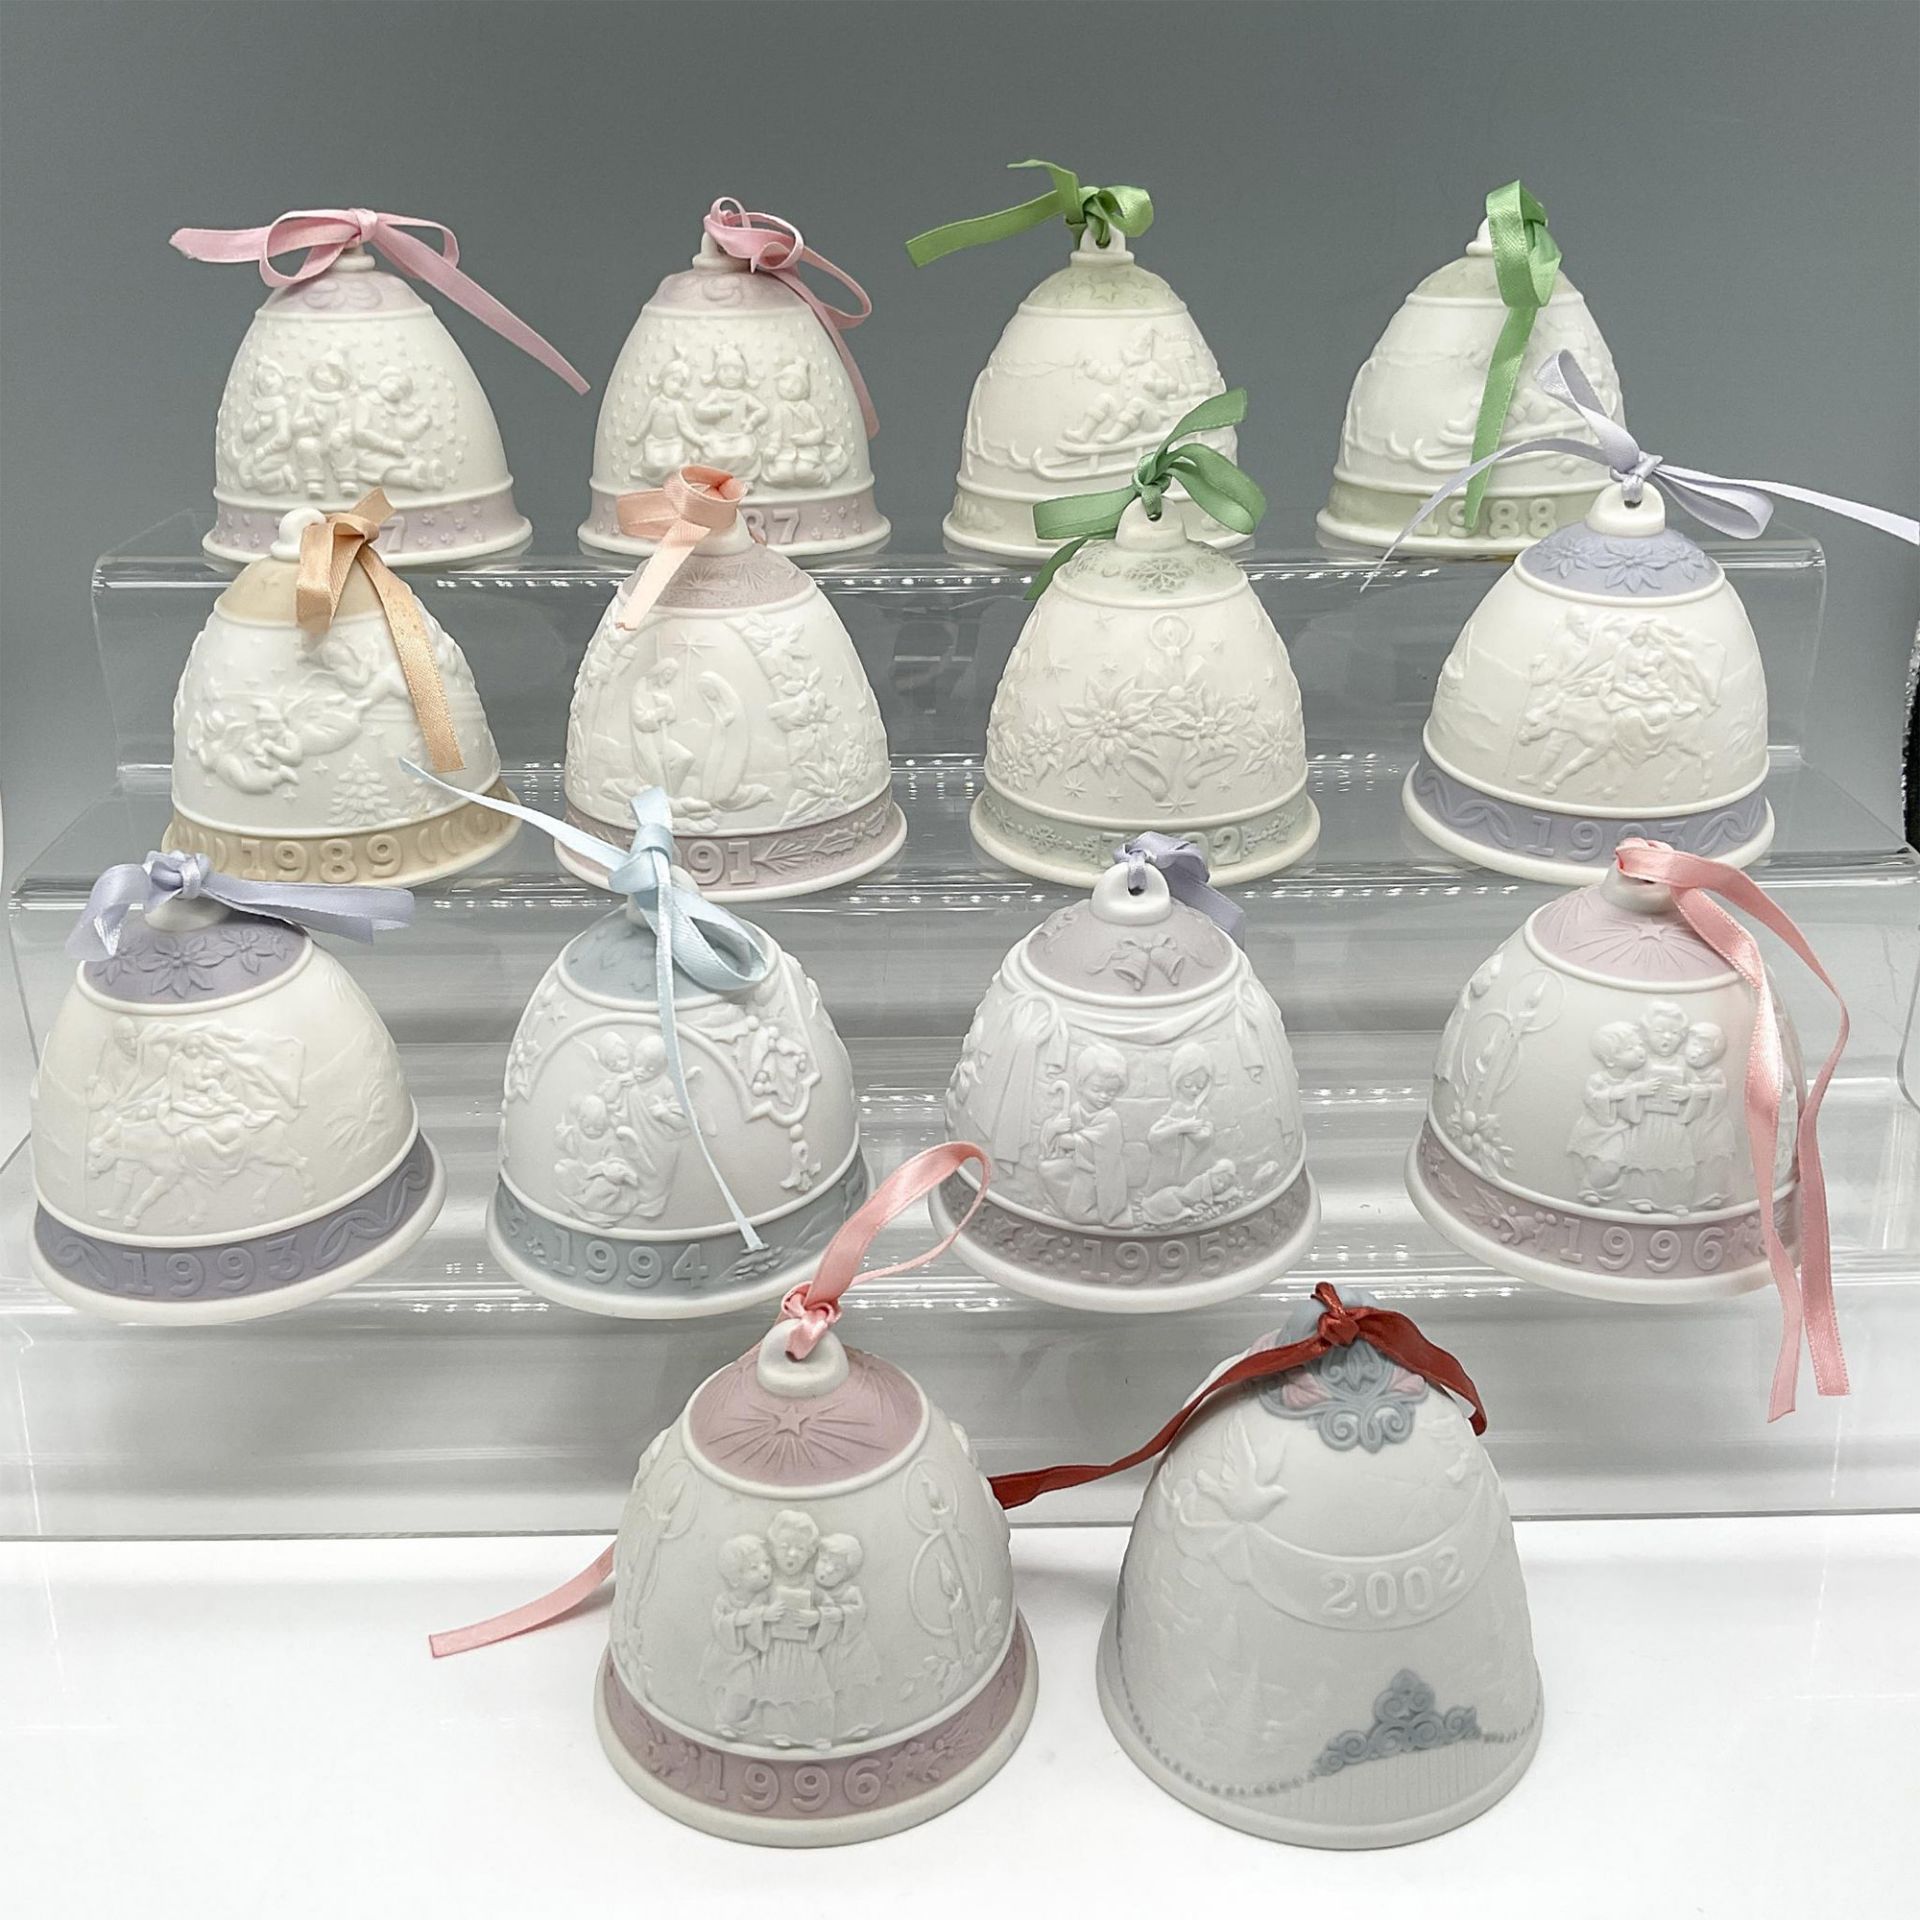 14pc Lladro Porcelain Annual Holiday Bell Ornaments